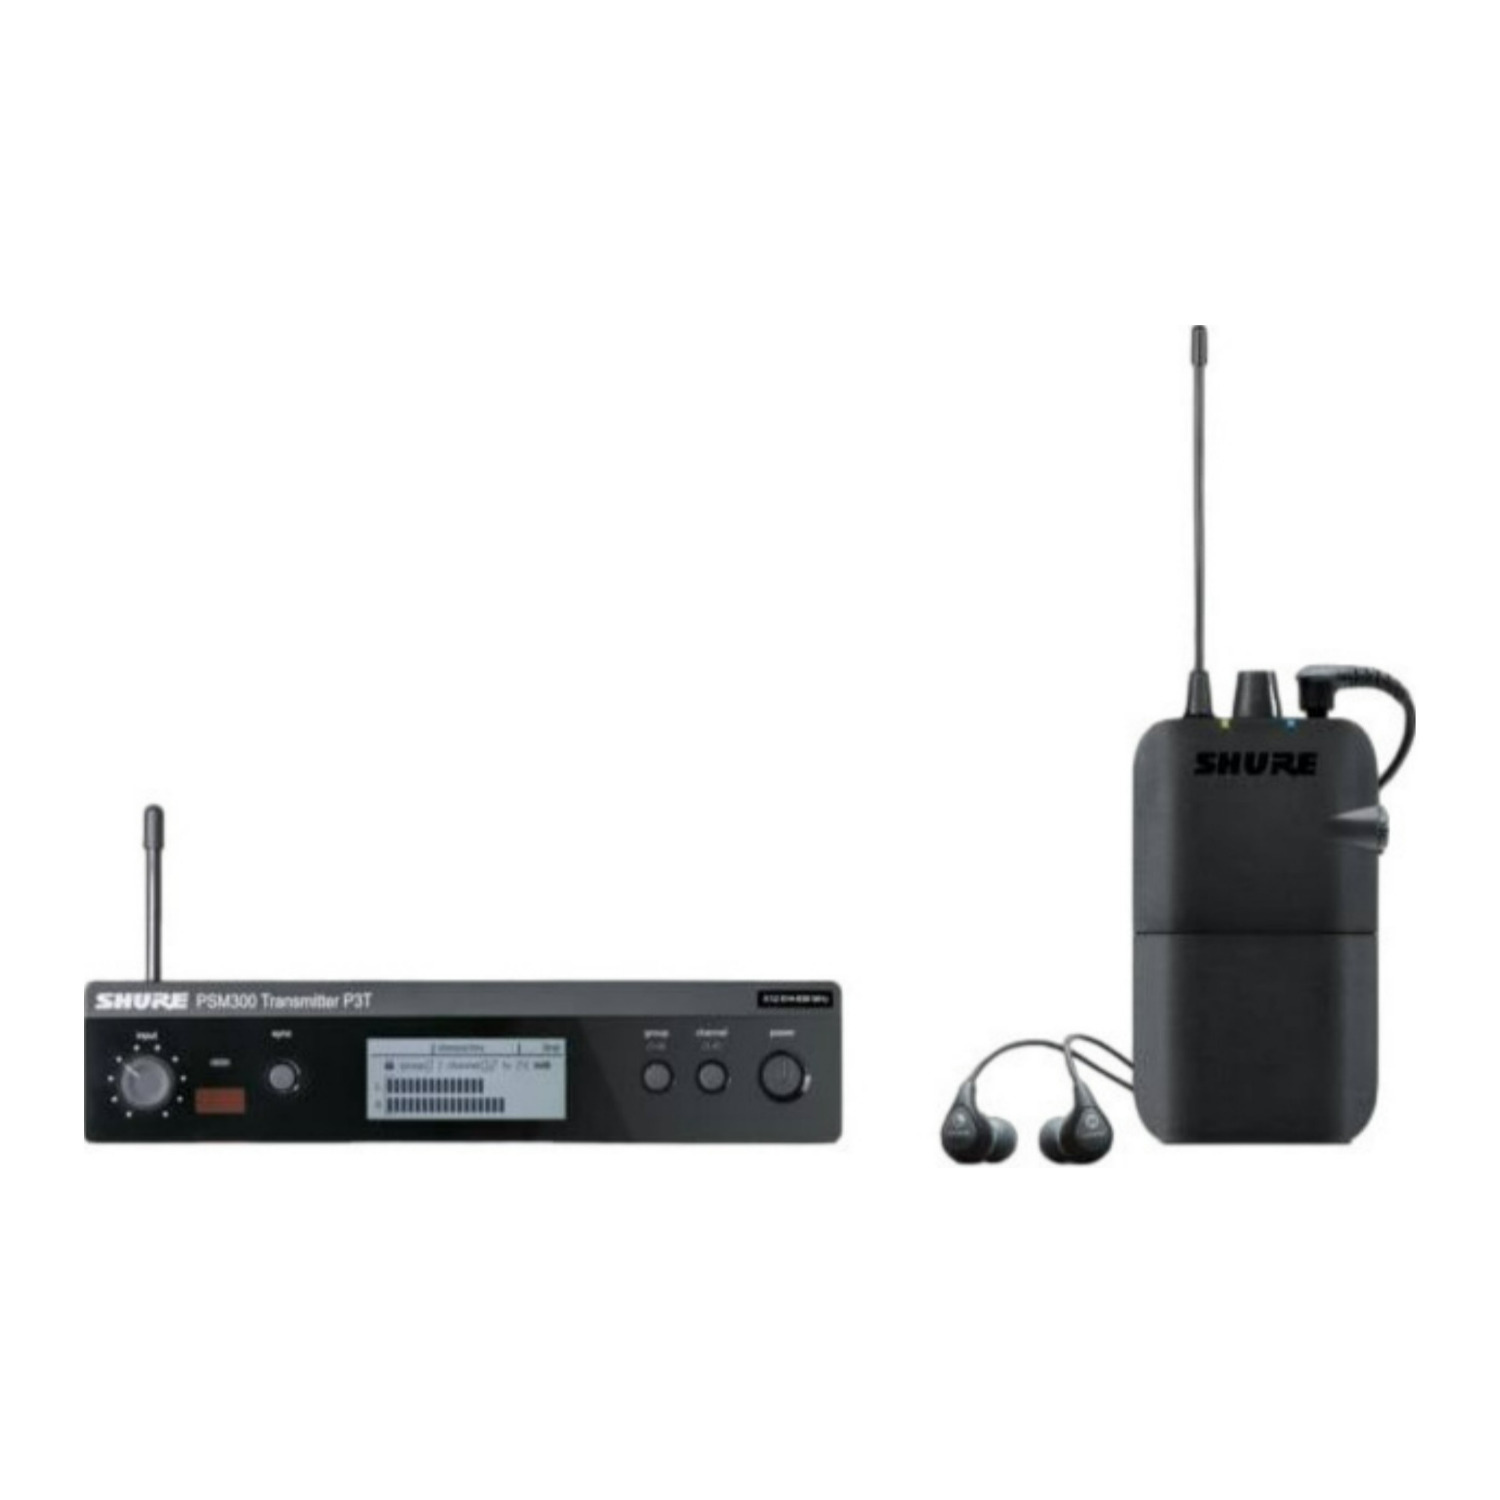 Shure P3TR112GR PSM300 Wireless In-Ear Monitoring Set with SE112 Earphones and H20 Frequency Band in Black -  P3TR112GR-H20